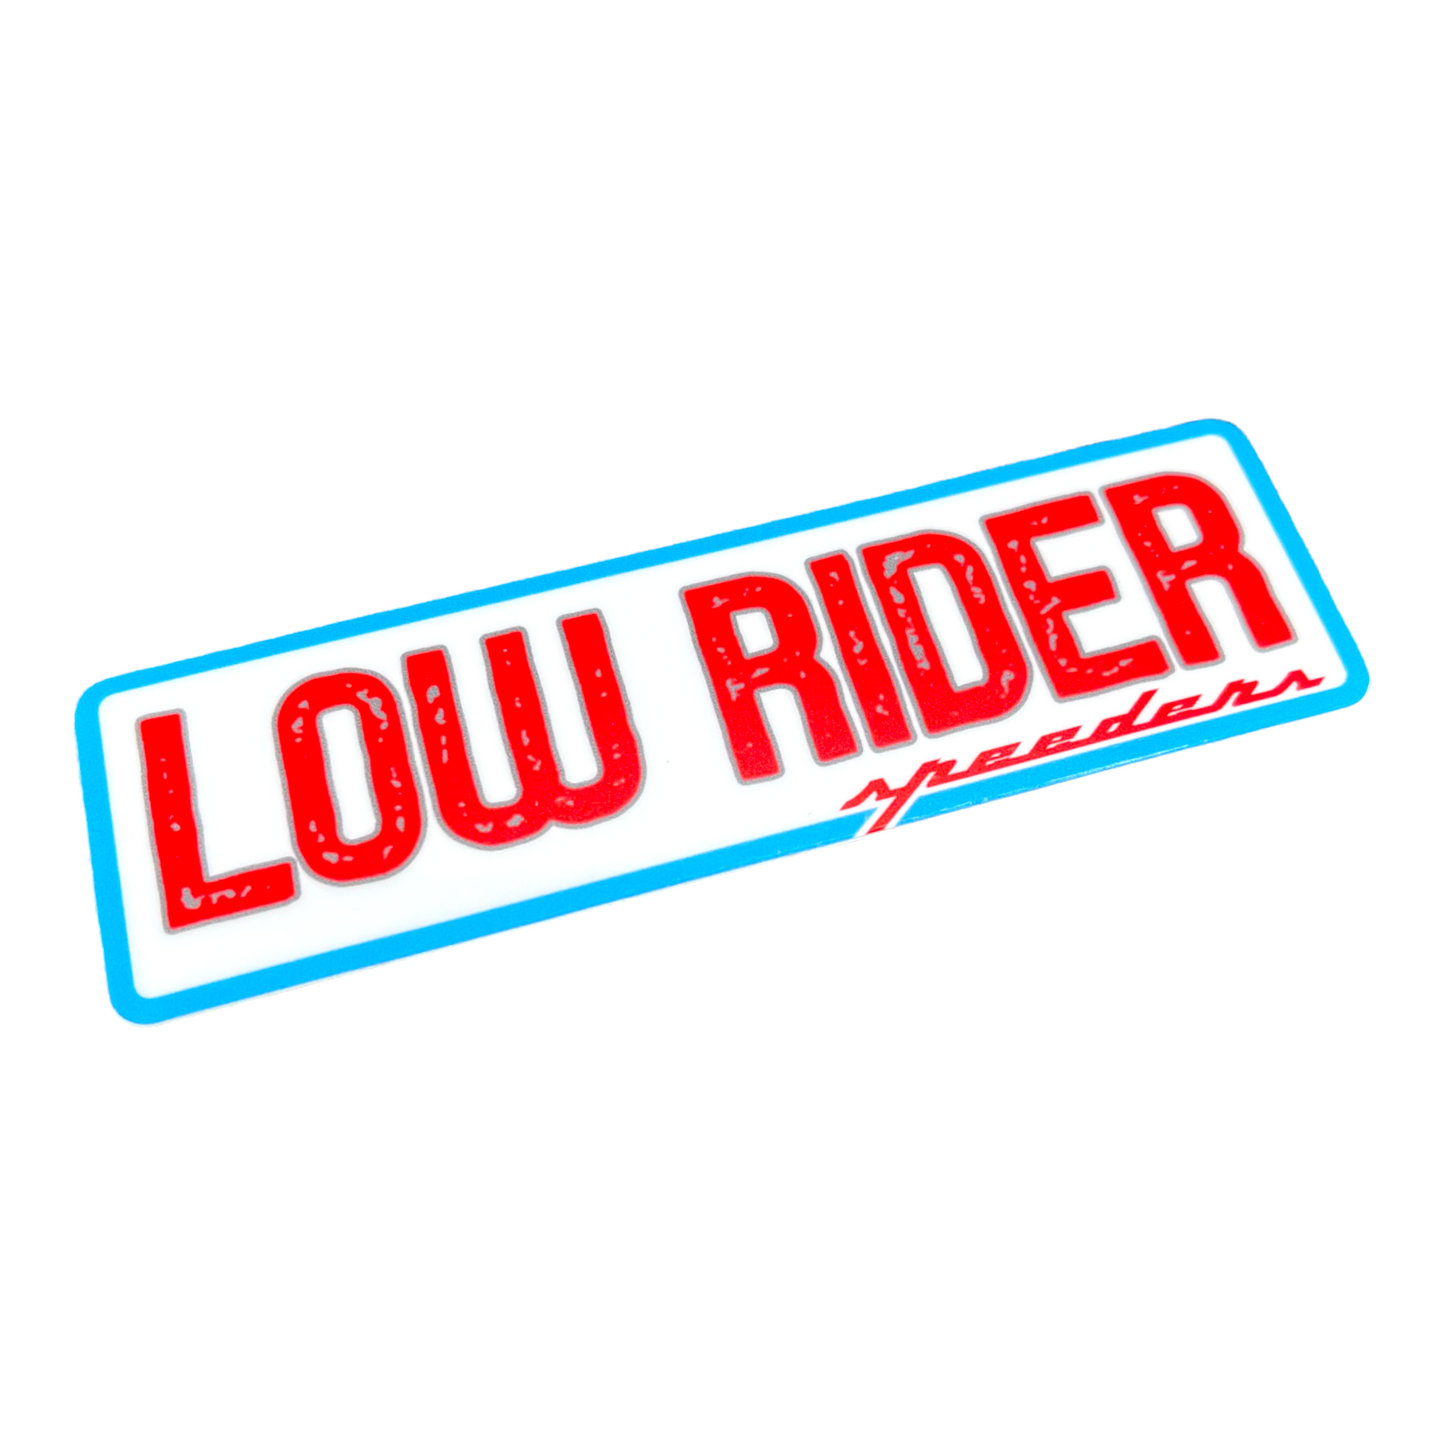 "Low Rider" Automotive Sticker (Red, White, and Blue)